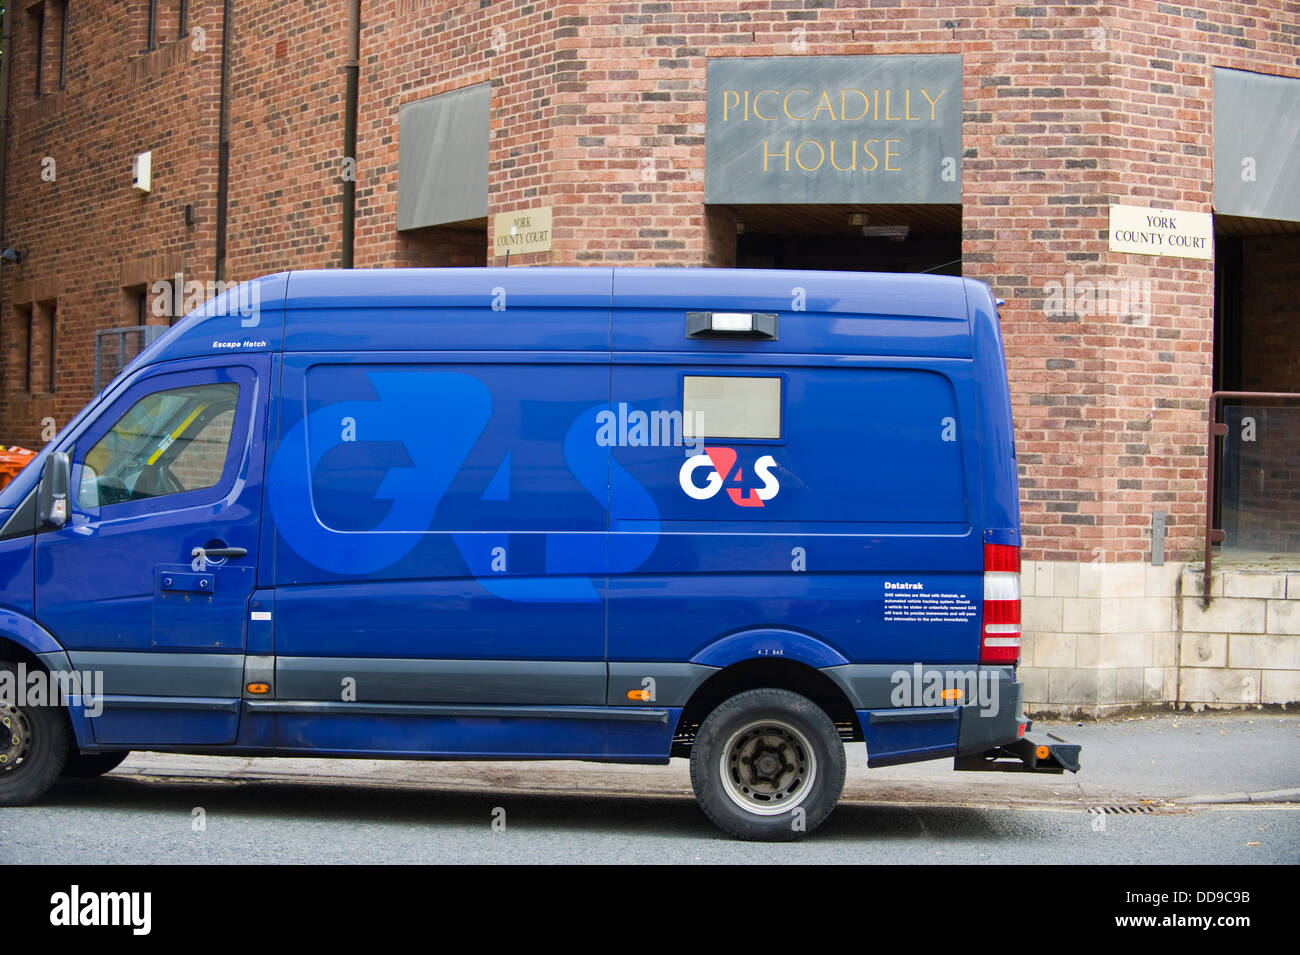 G4S security van outside York County Court in city of York North Yorkshire England UK Stock Photo